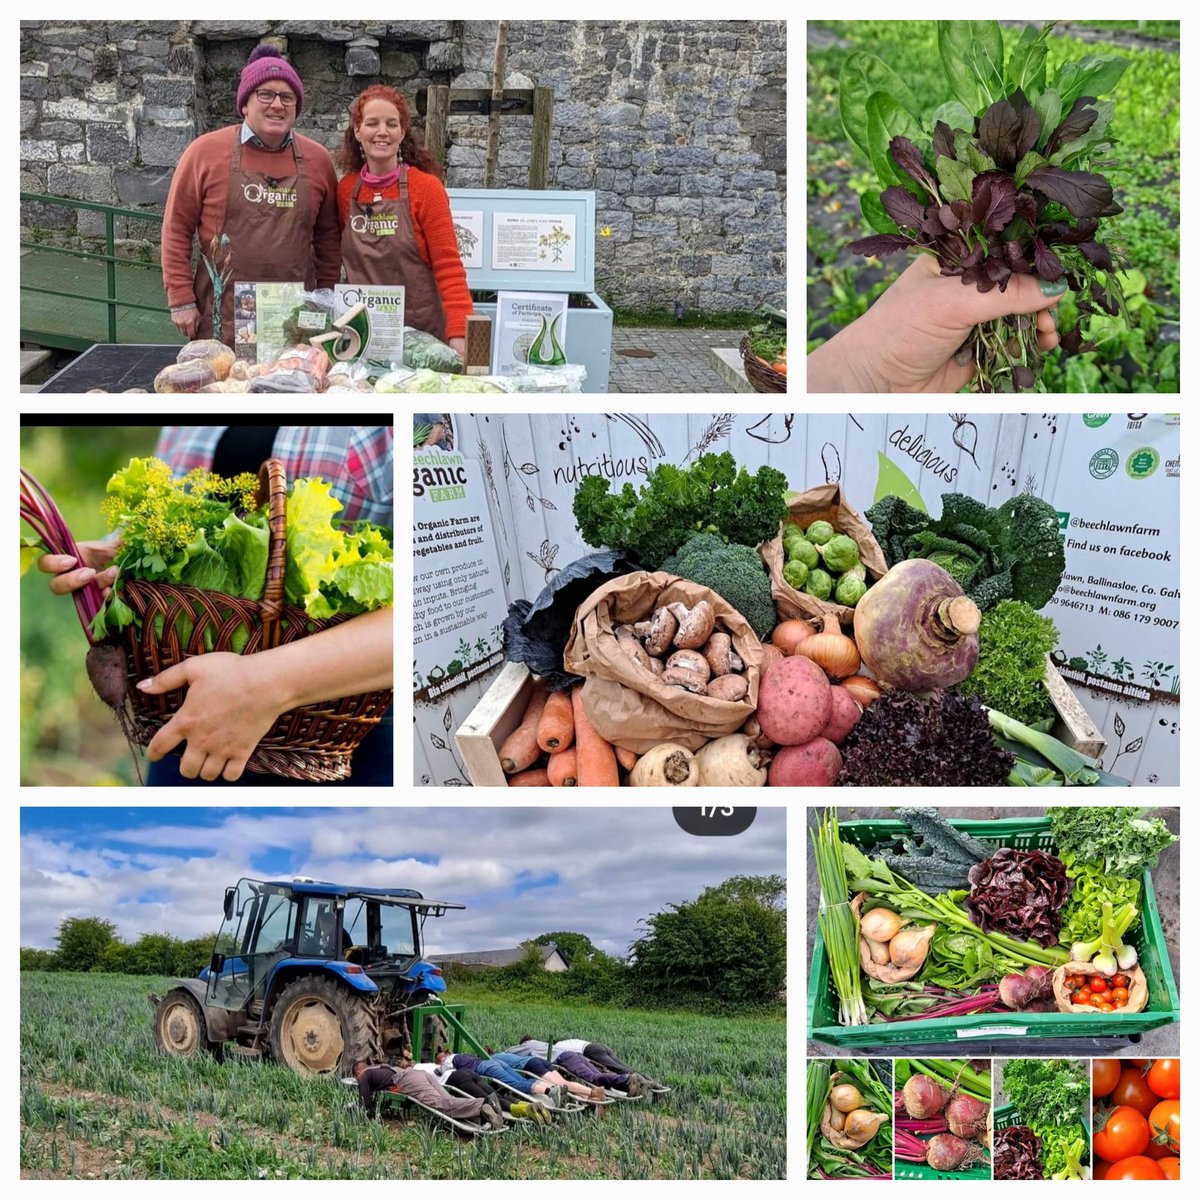 Day 6 meet the local producers.
Padraig and Una @BeechlawnFarm grow organic vegetables near Ballinasloe. They are out in all kinds of weather growing and harvesting seasonal, full of flavour, Irish organic vegetables #irishvegetables 
 #irishfoodproducers